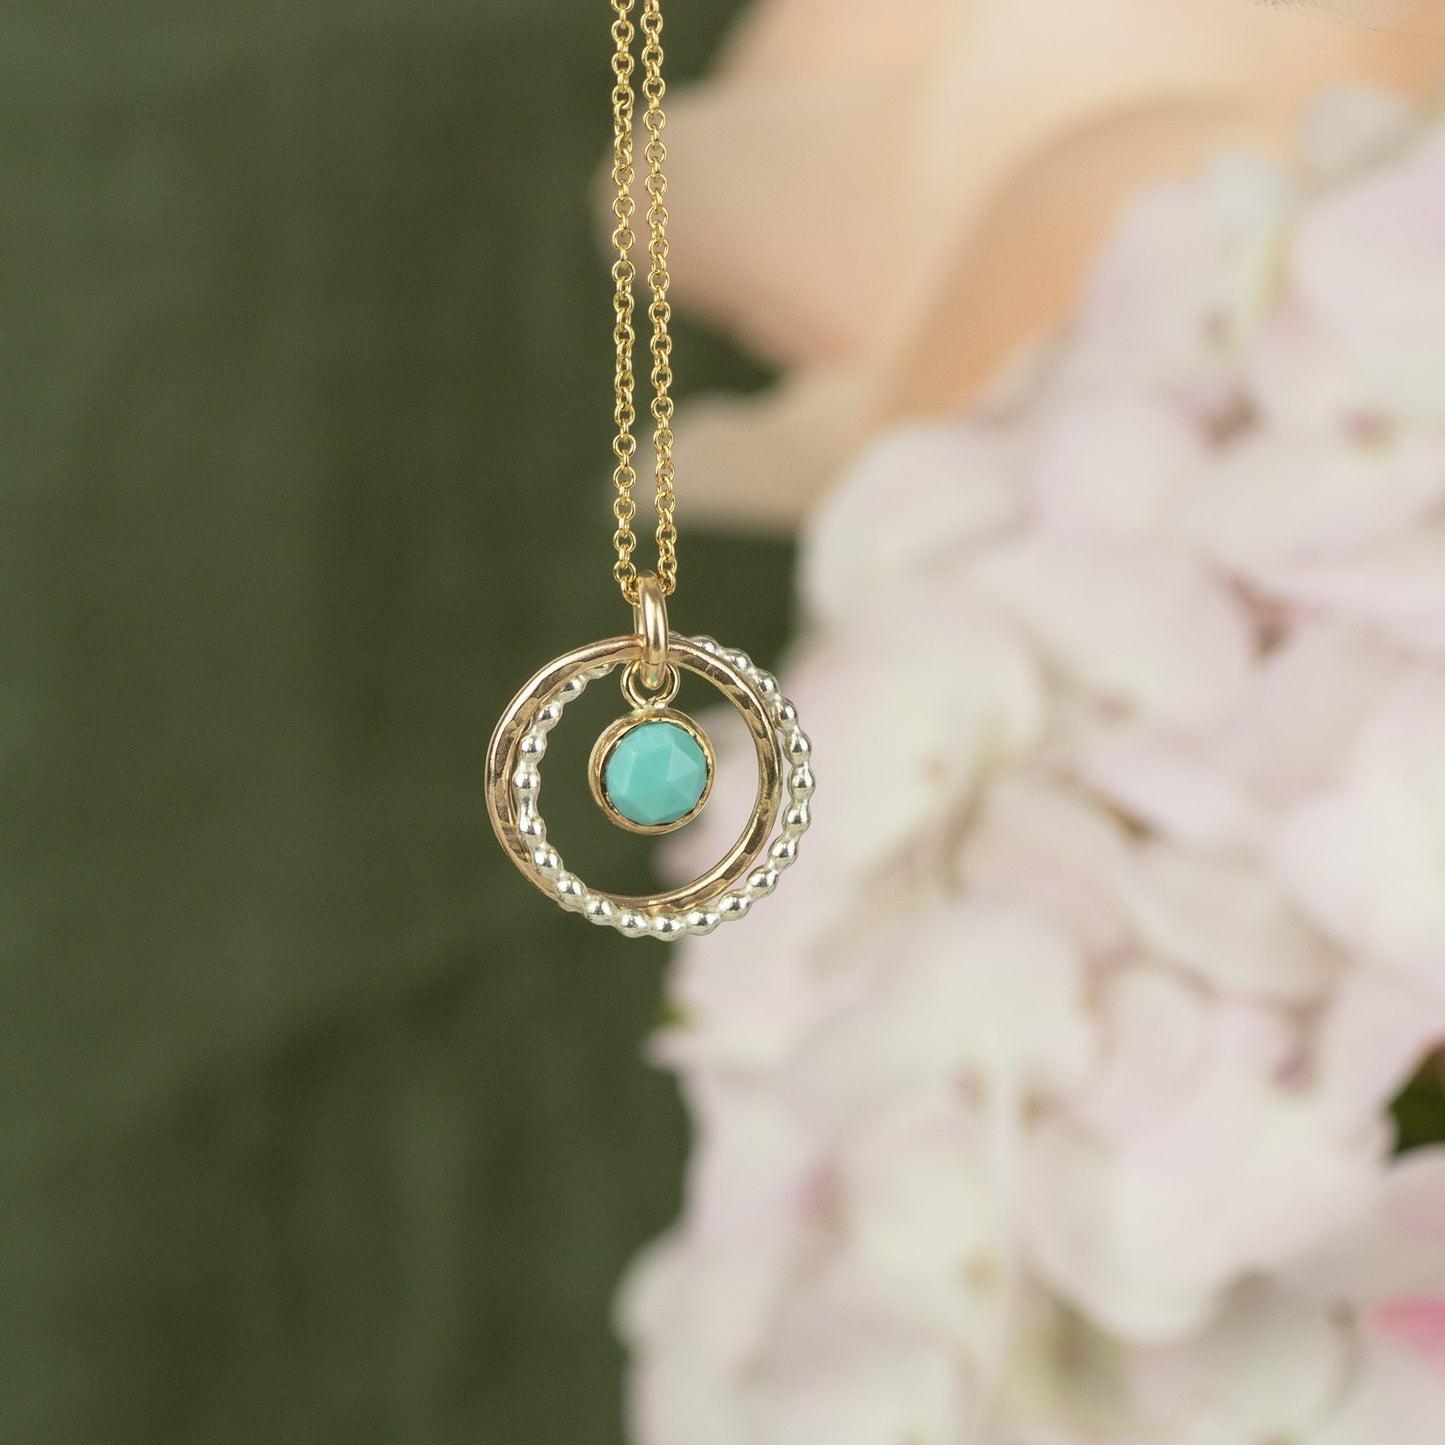 11th Anniversary Gift - Turquoise Anniversary Necklace - Silver & Gold